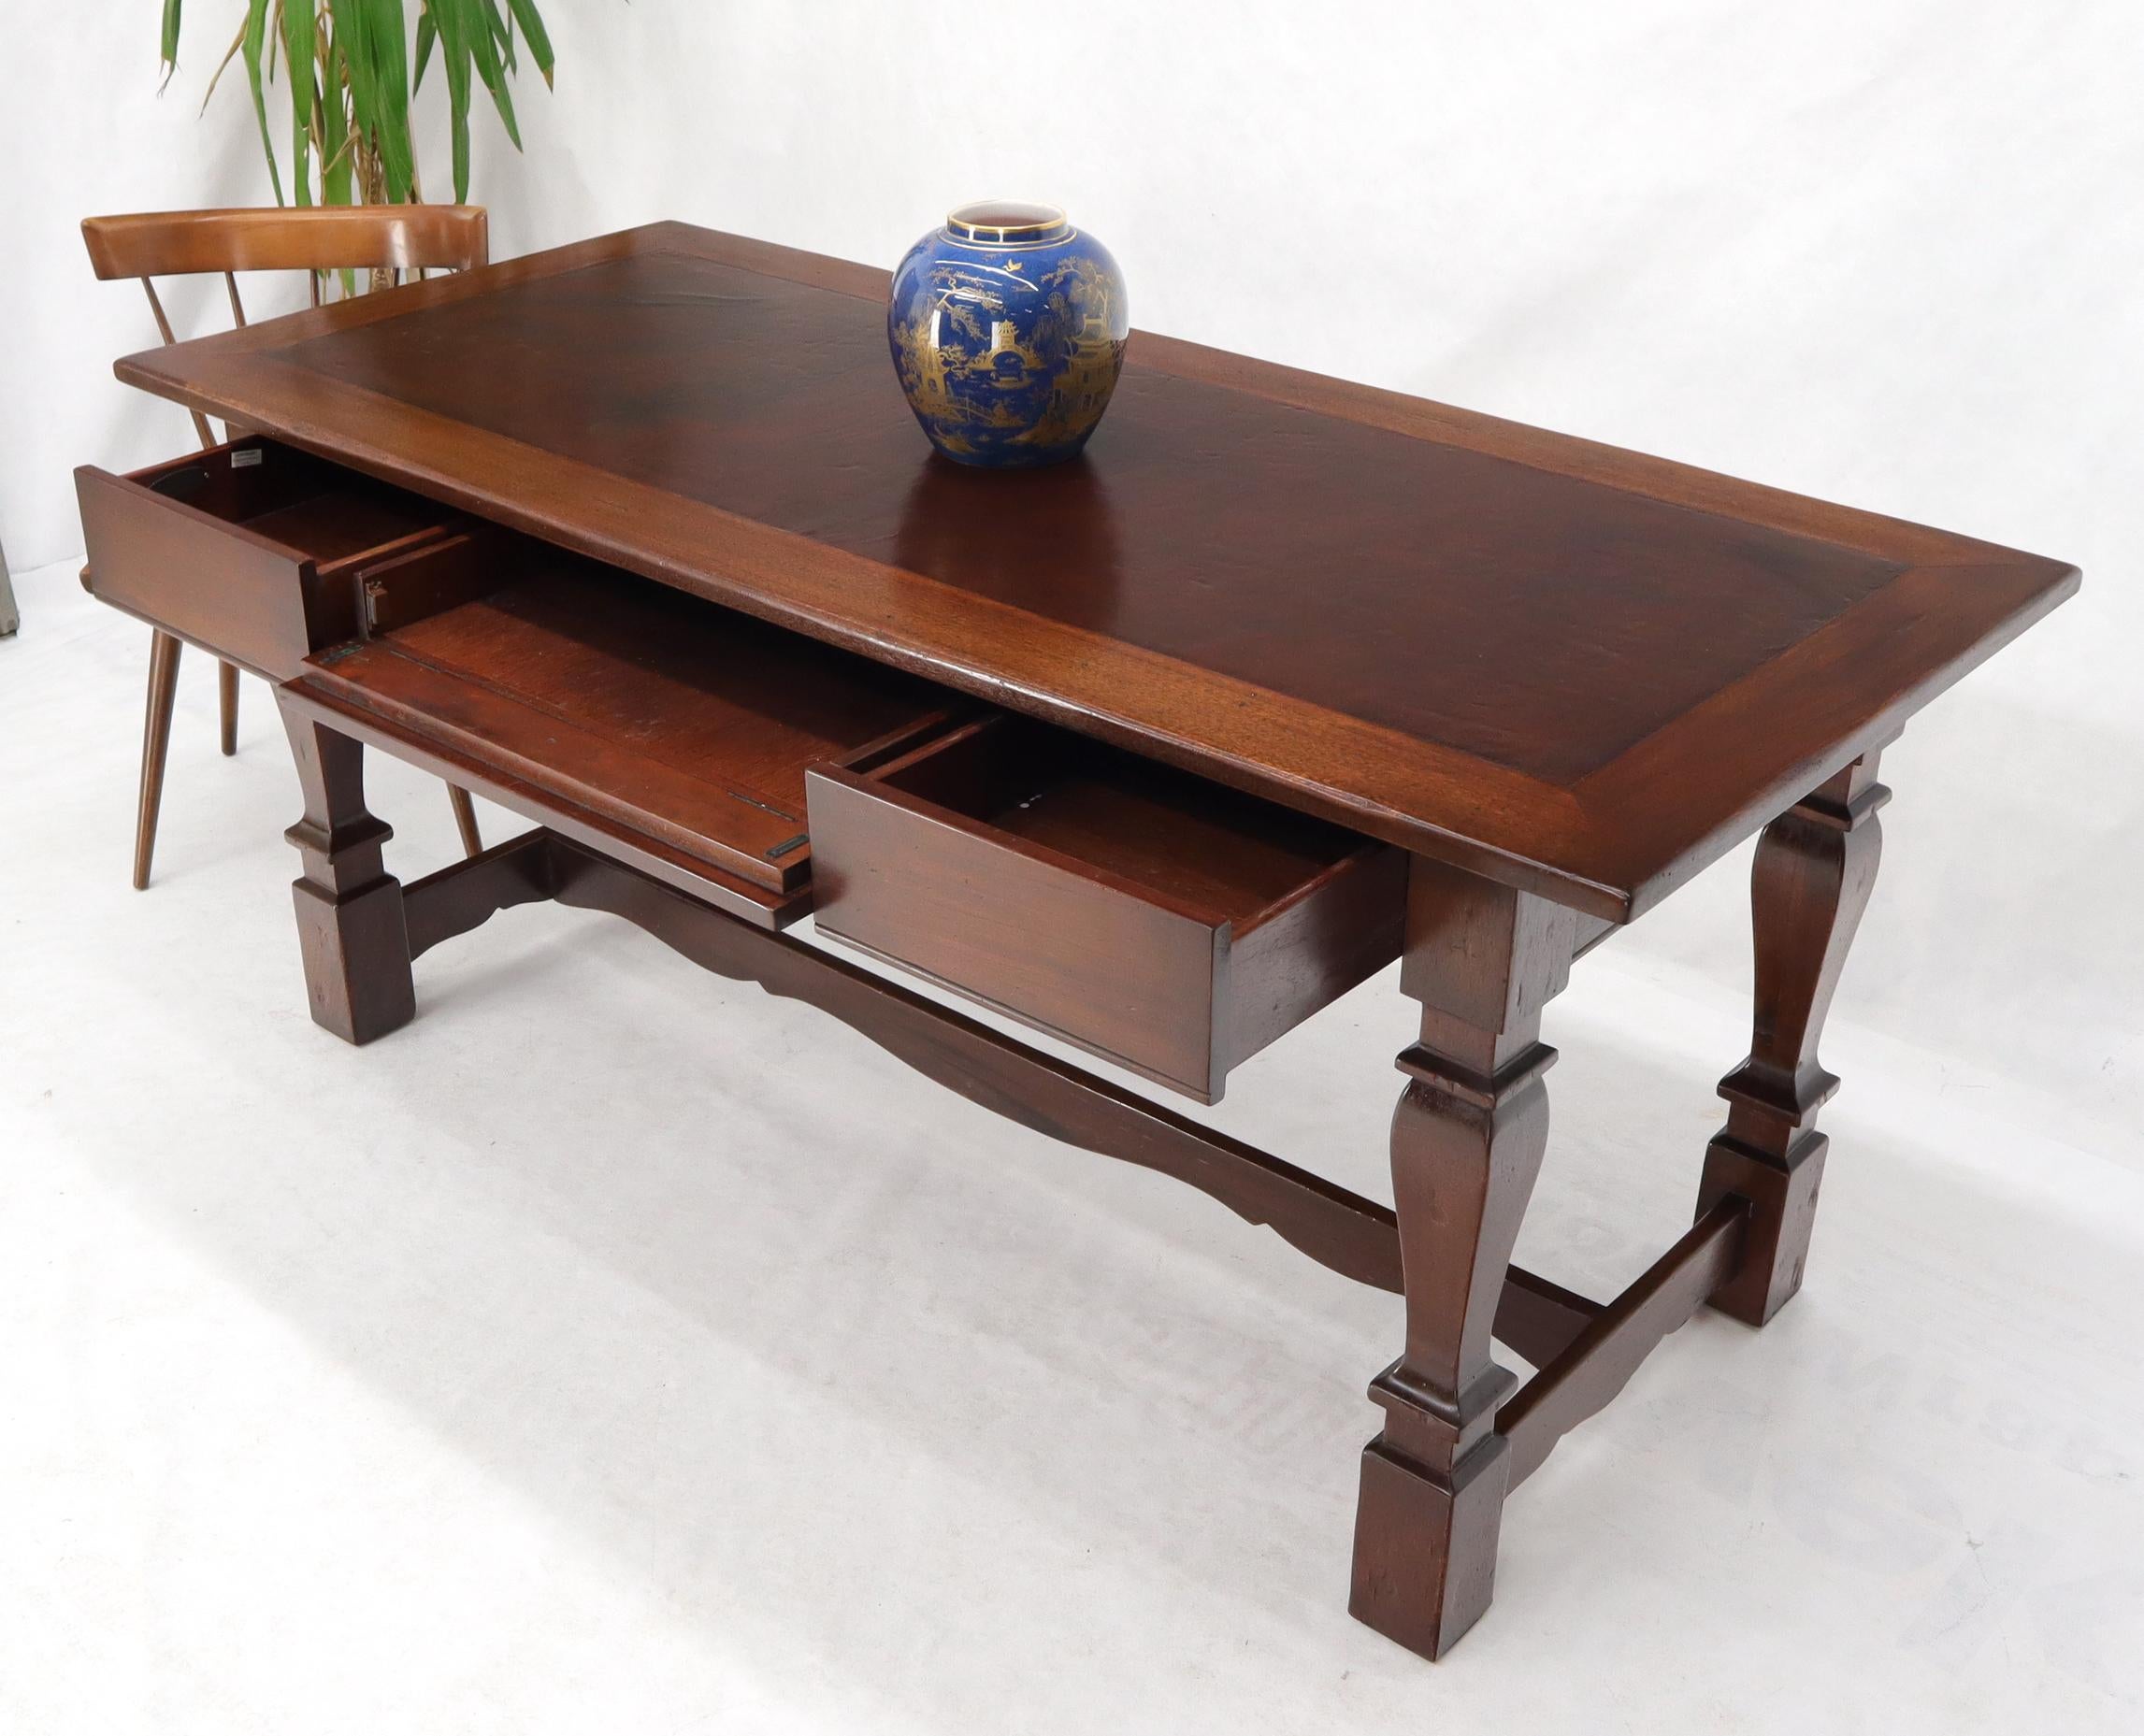 Farm style stretcher heavy legs leather top writing table desk with three drawers. Outstanding craftsmanship and materials.